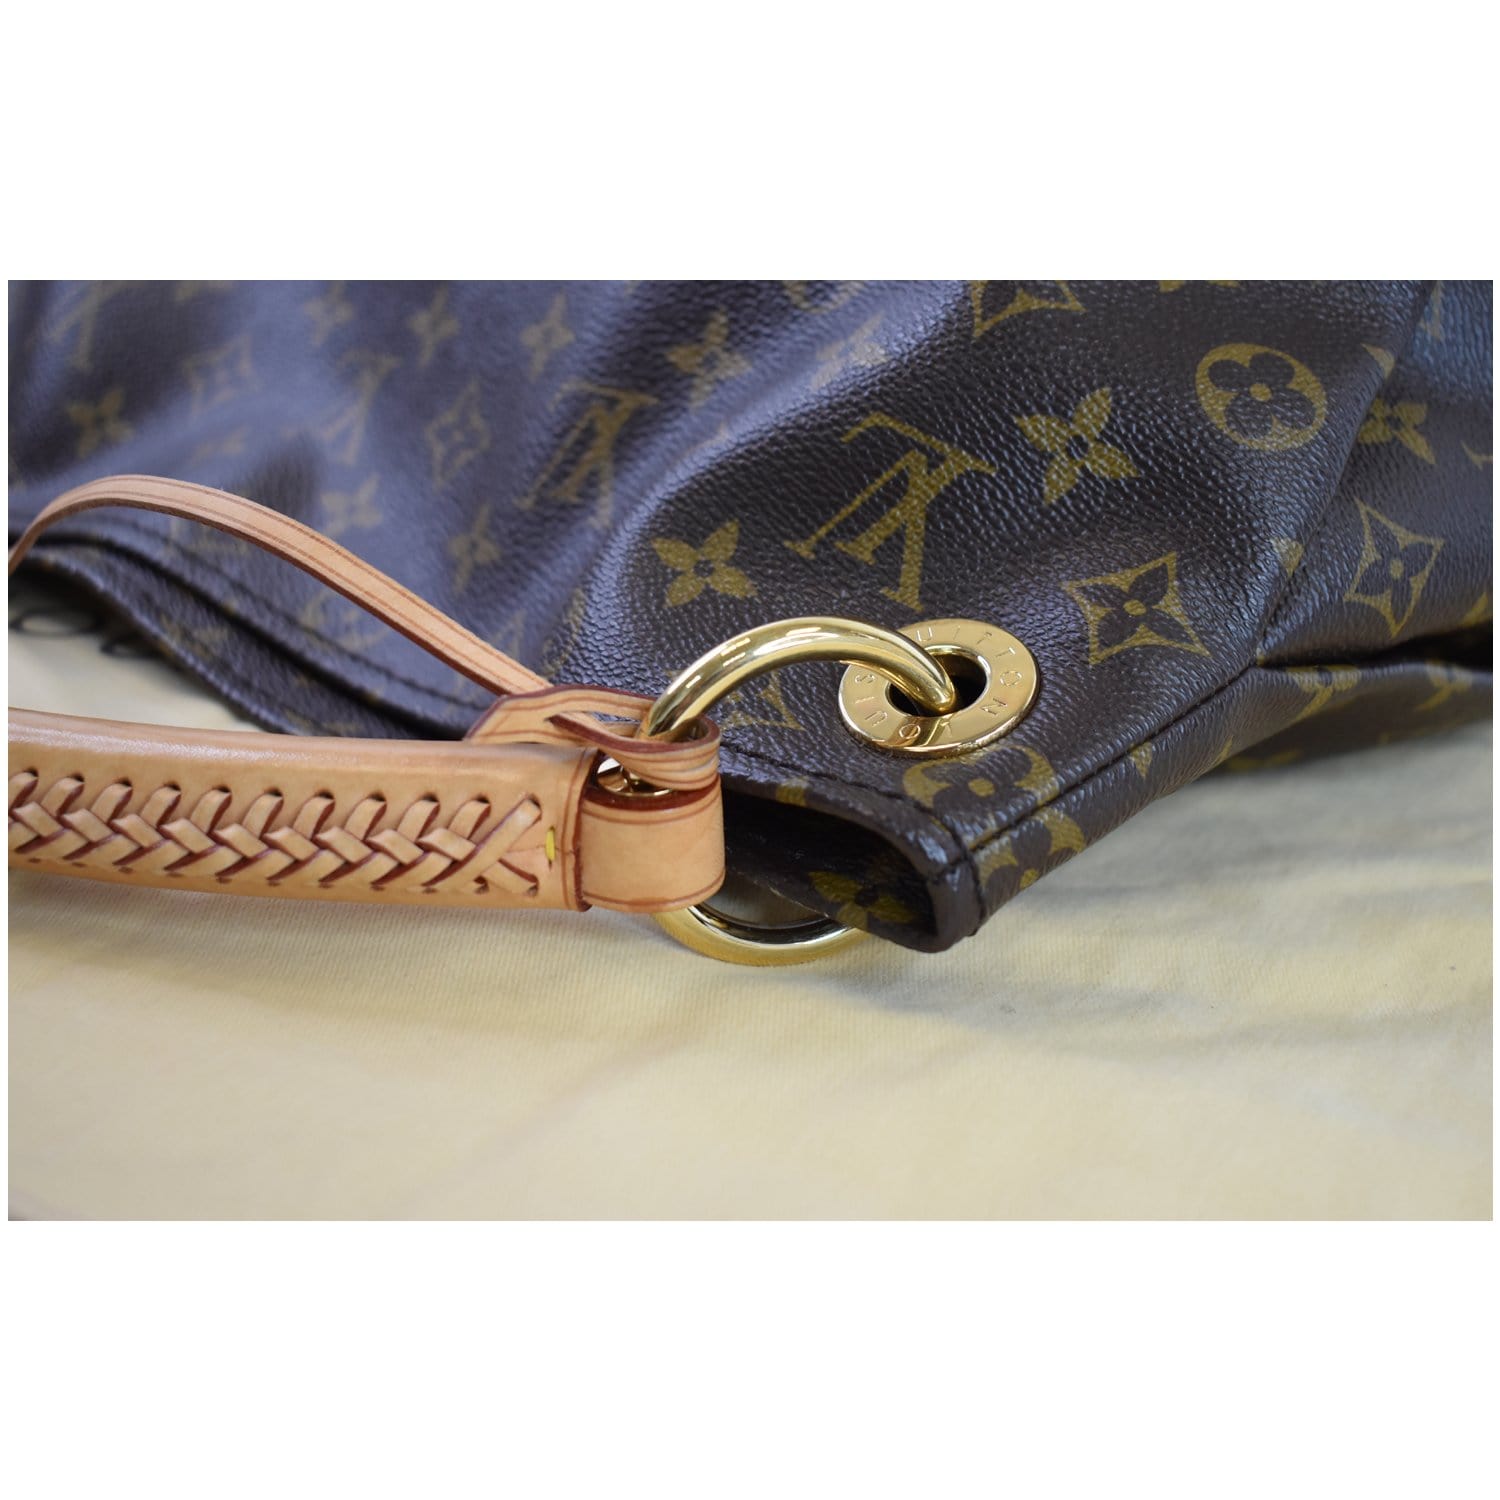 Louis Vuitton Brown Monogram Coated Canvas Artsy MM Gold Hardware,  2021-2022 Available For Immediate Sale At Sotheby's